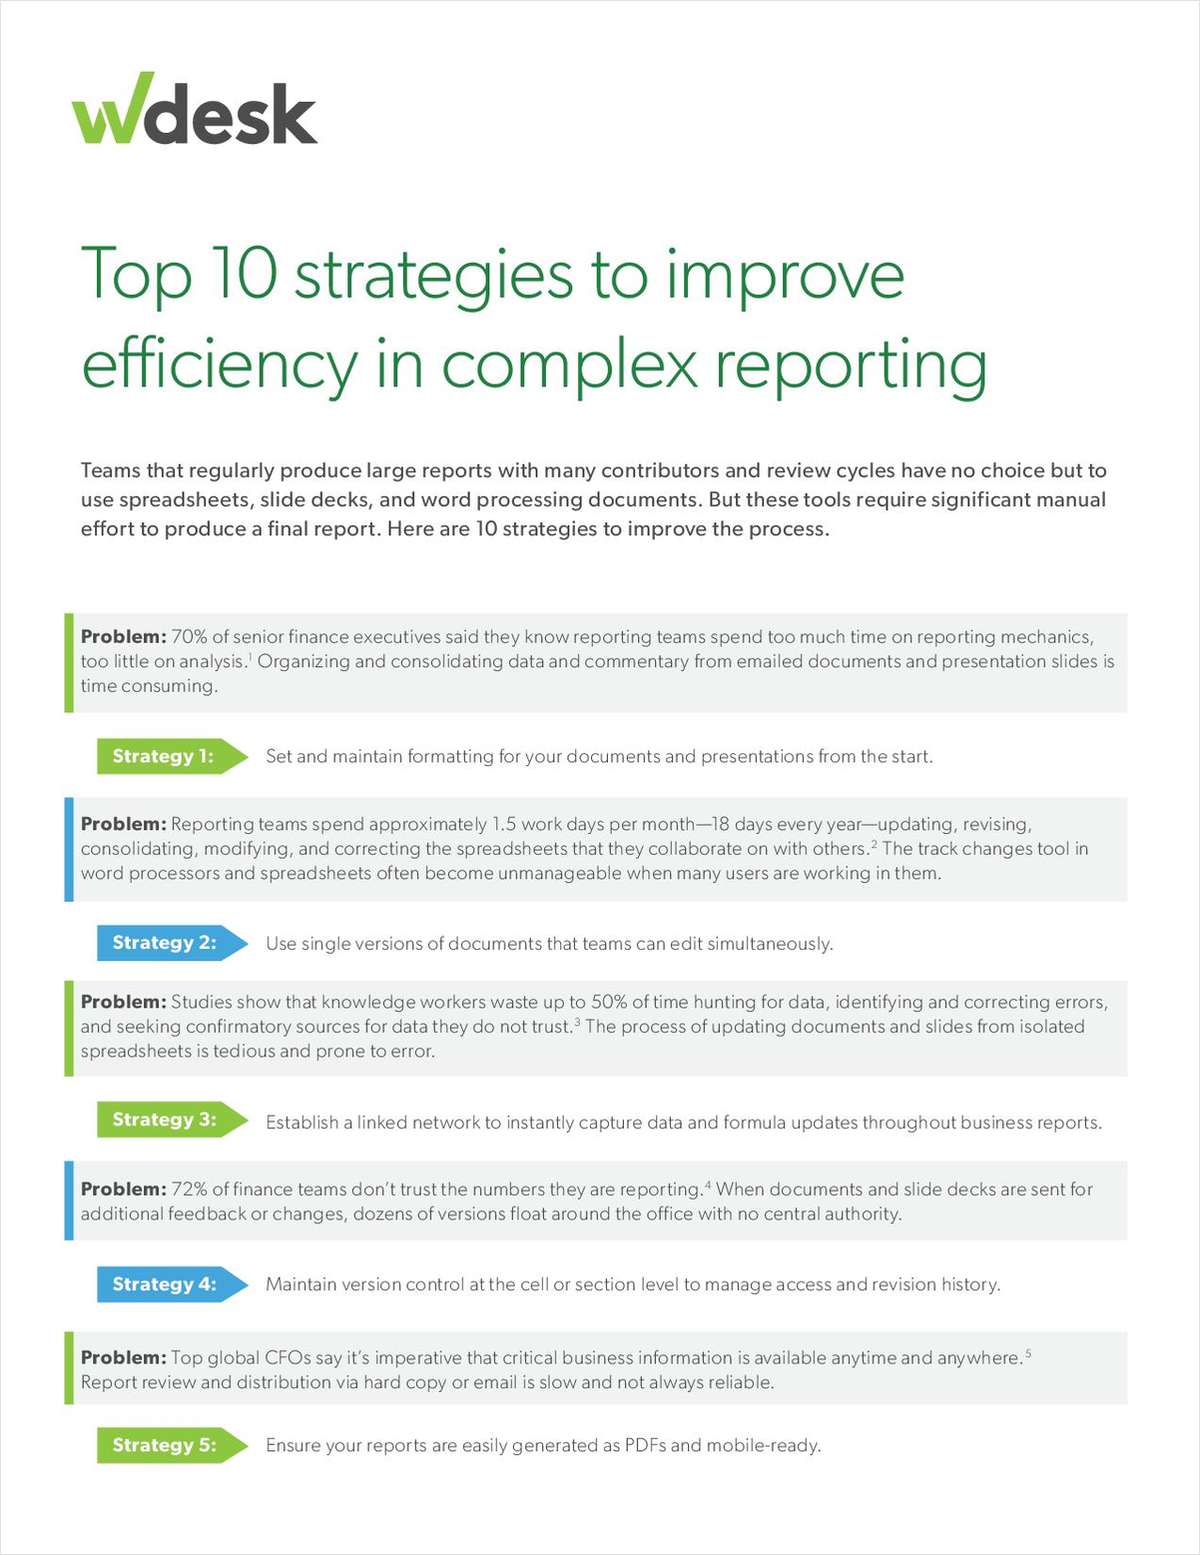 Top 10 Strategies to Improve Efficiency in Complex Reporting